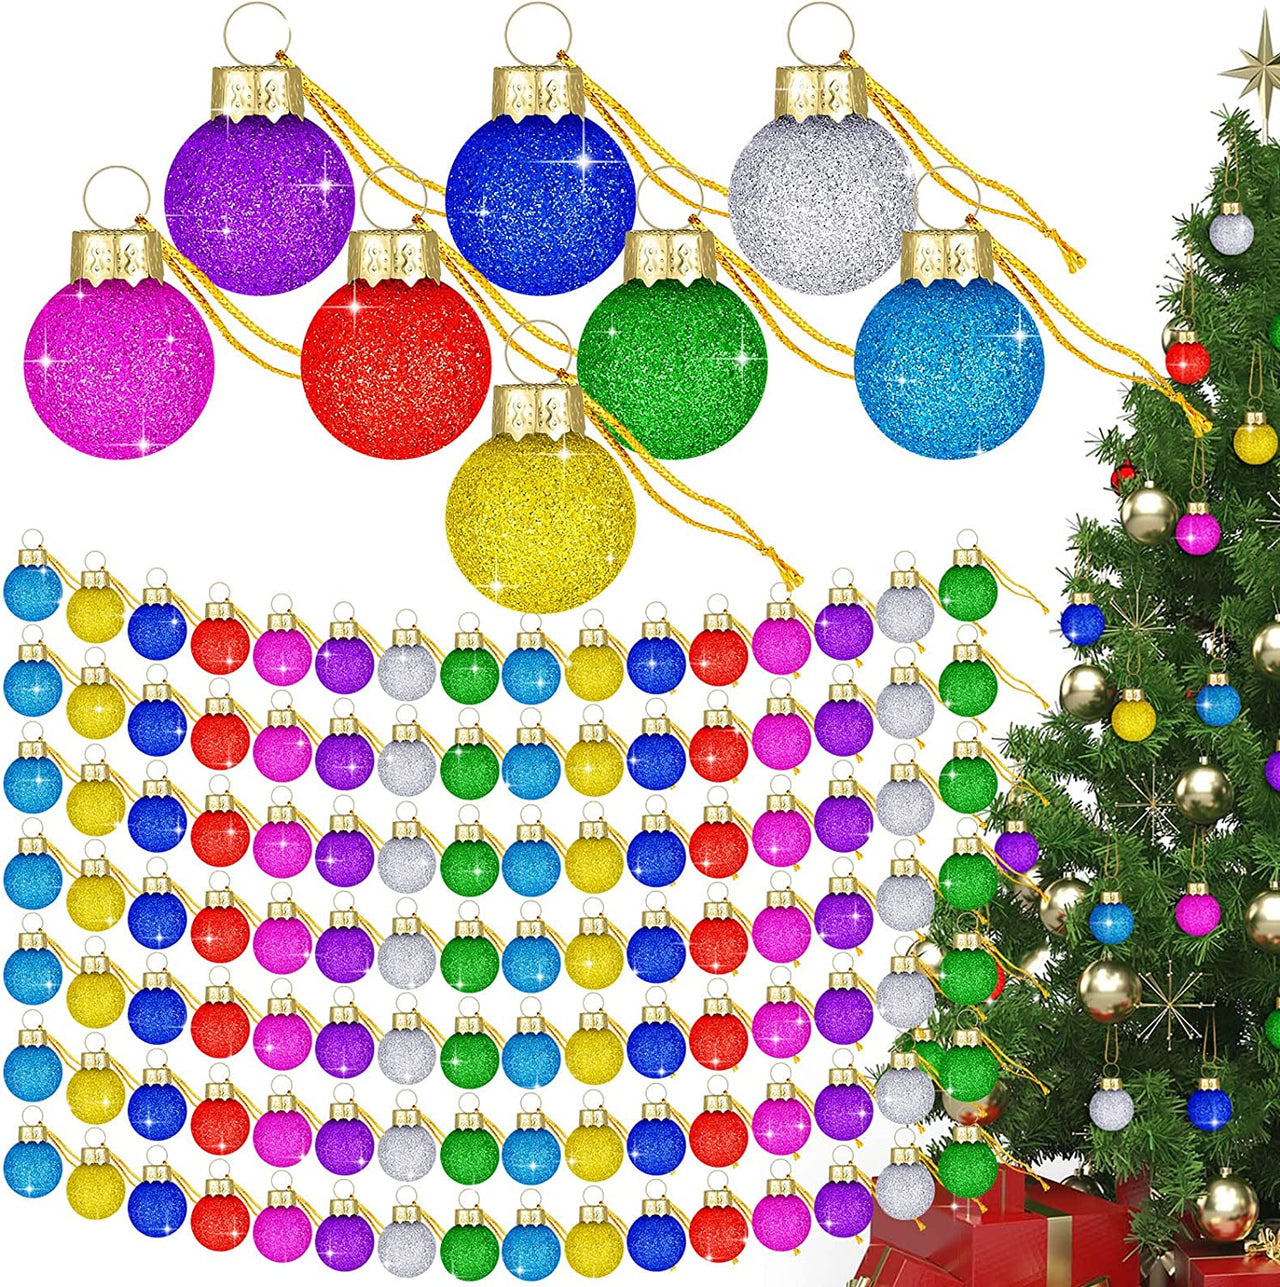 1 Inch Christmas Mini Glitter Glass Ball Multicolor Ornaments Set Christmas Tree Decorations Miniature Balls Rustic Hanging Small Decorative Christmas Ball for Holiday Wedding Party Decor